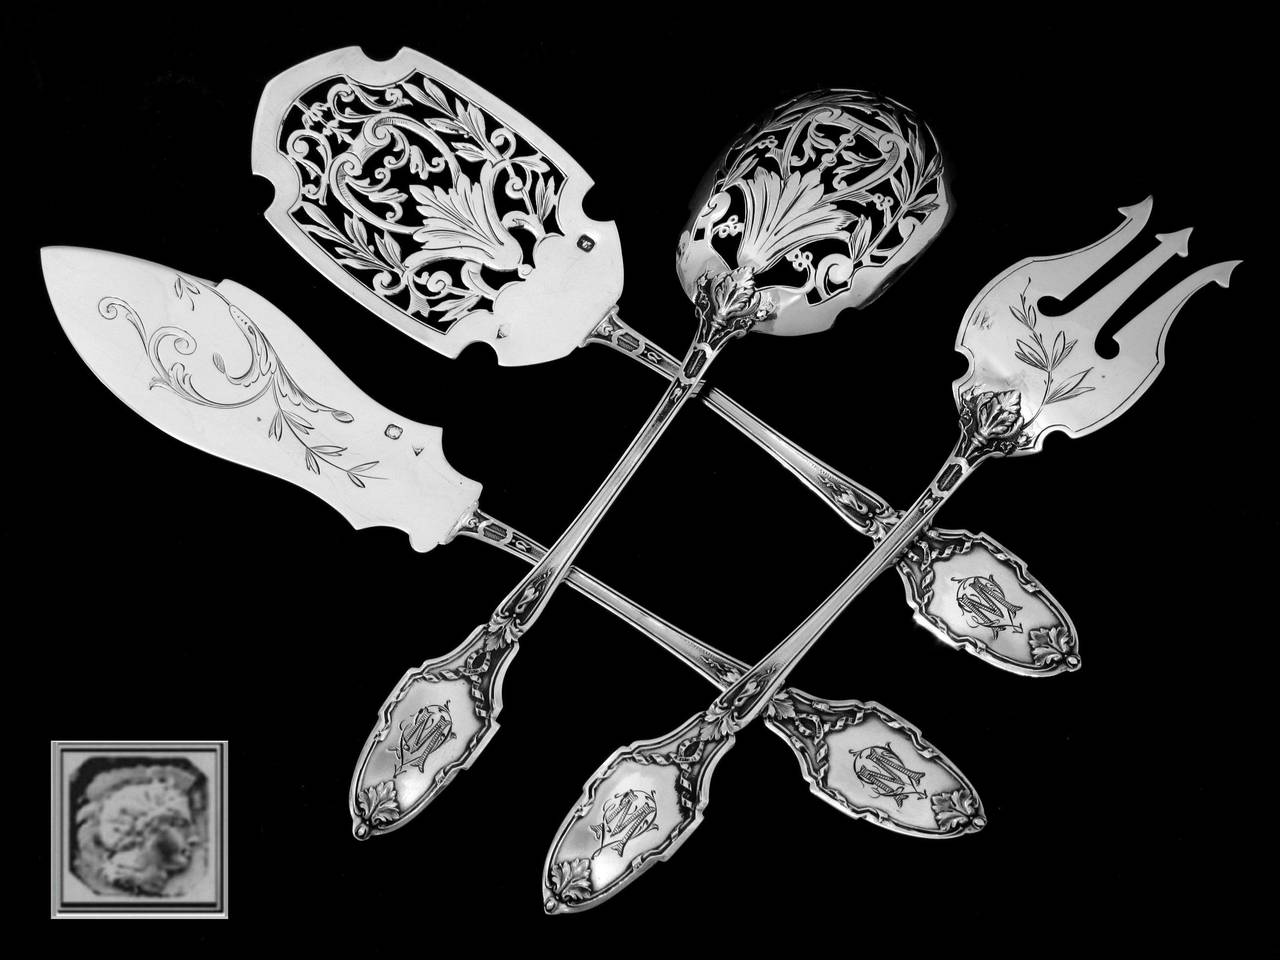 Gorgeous French All Sterling Silver Hors D'oeuvre Set 4 pc w/box Louis XVI-style

Head of Minerve 1 st titre for 950/1000 French Sterling Silver guarantee

Four pieces of truly exceptional quality, for the richness of their Louis XVI decoration,